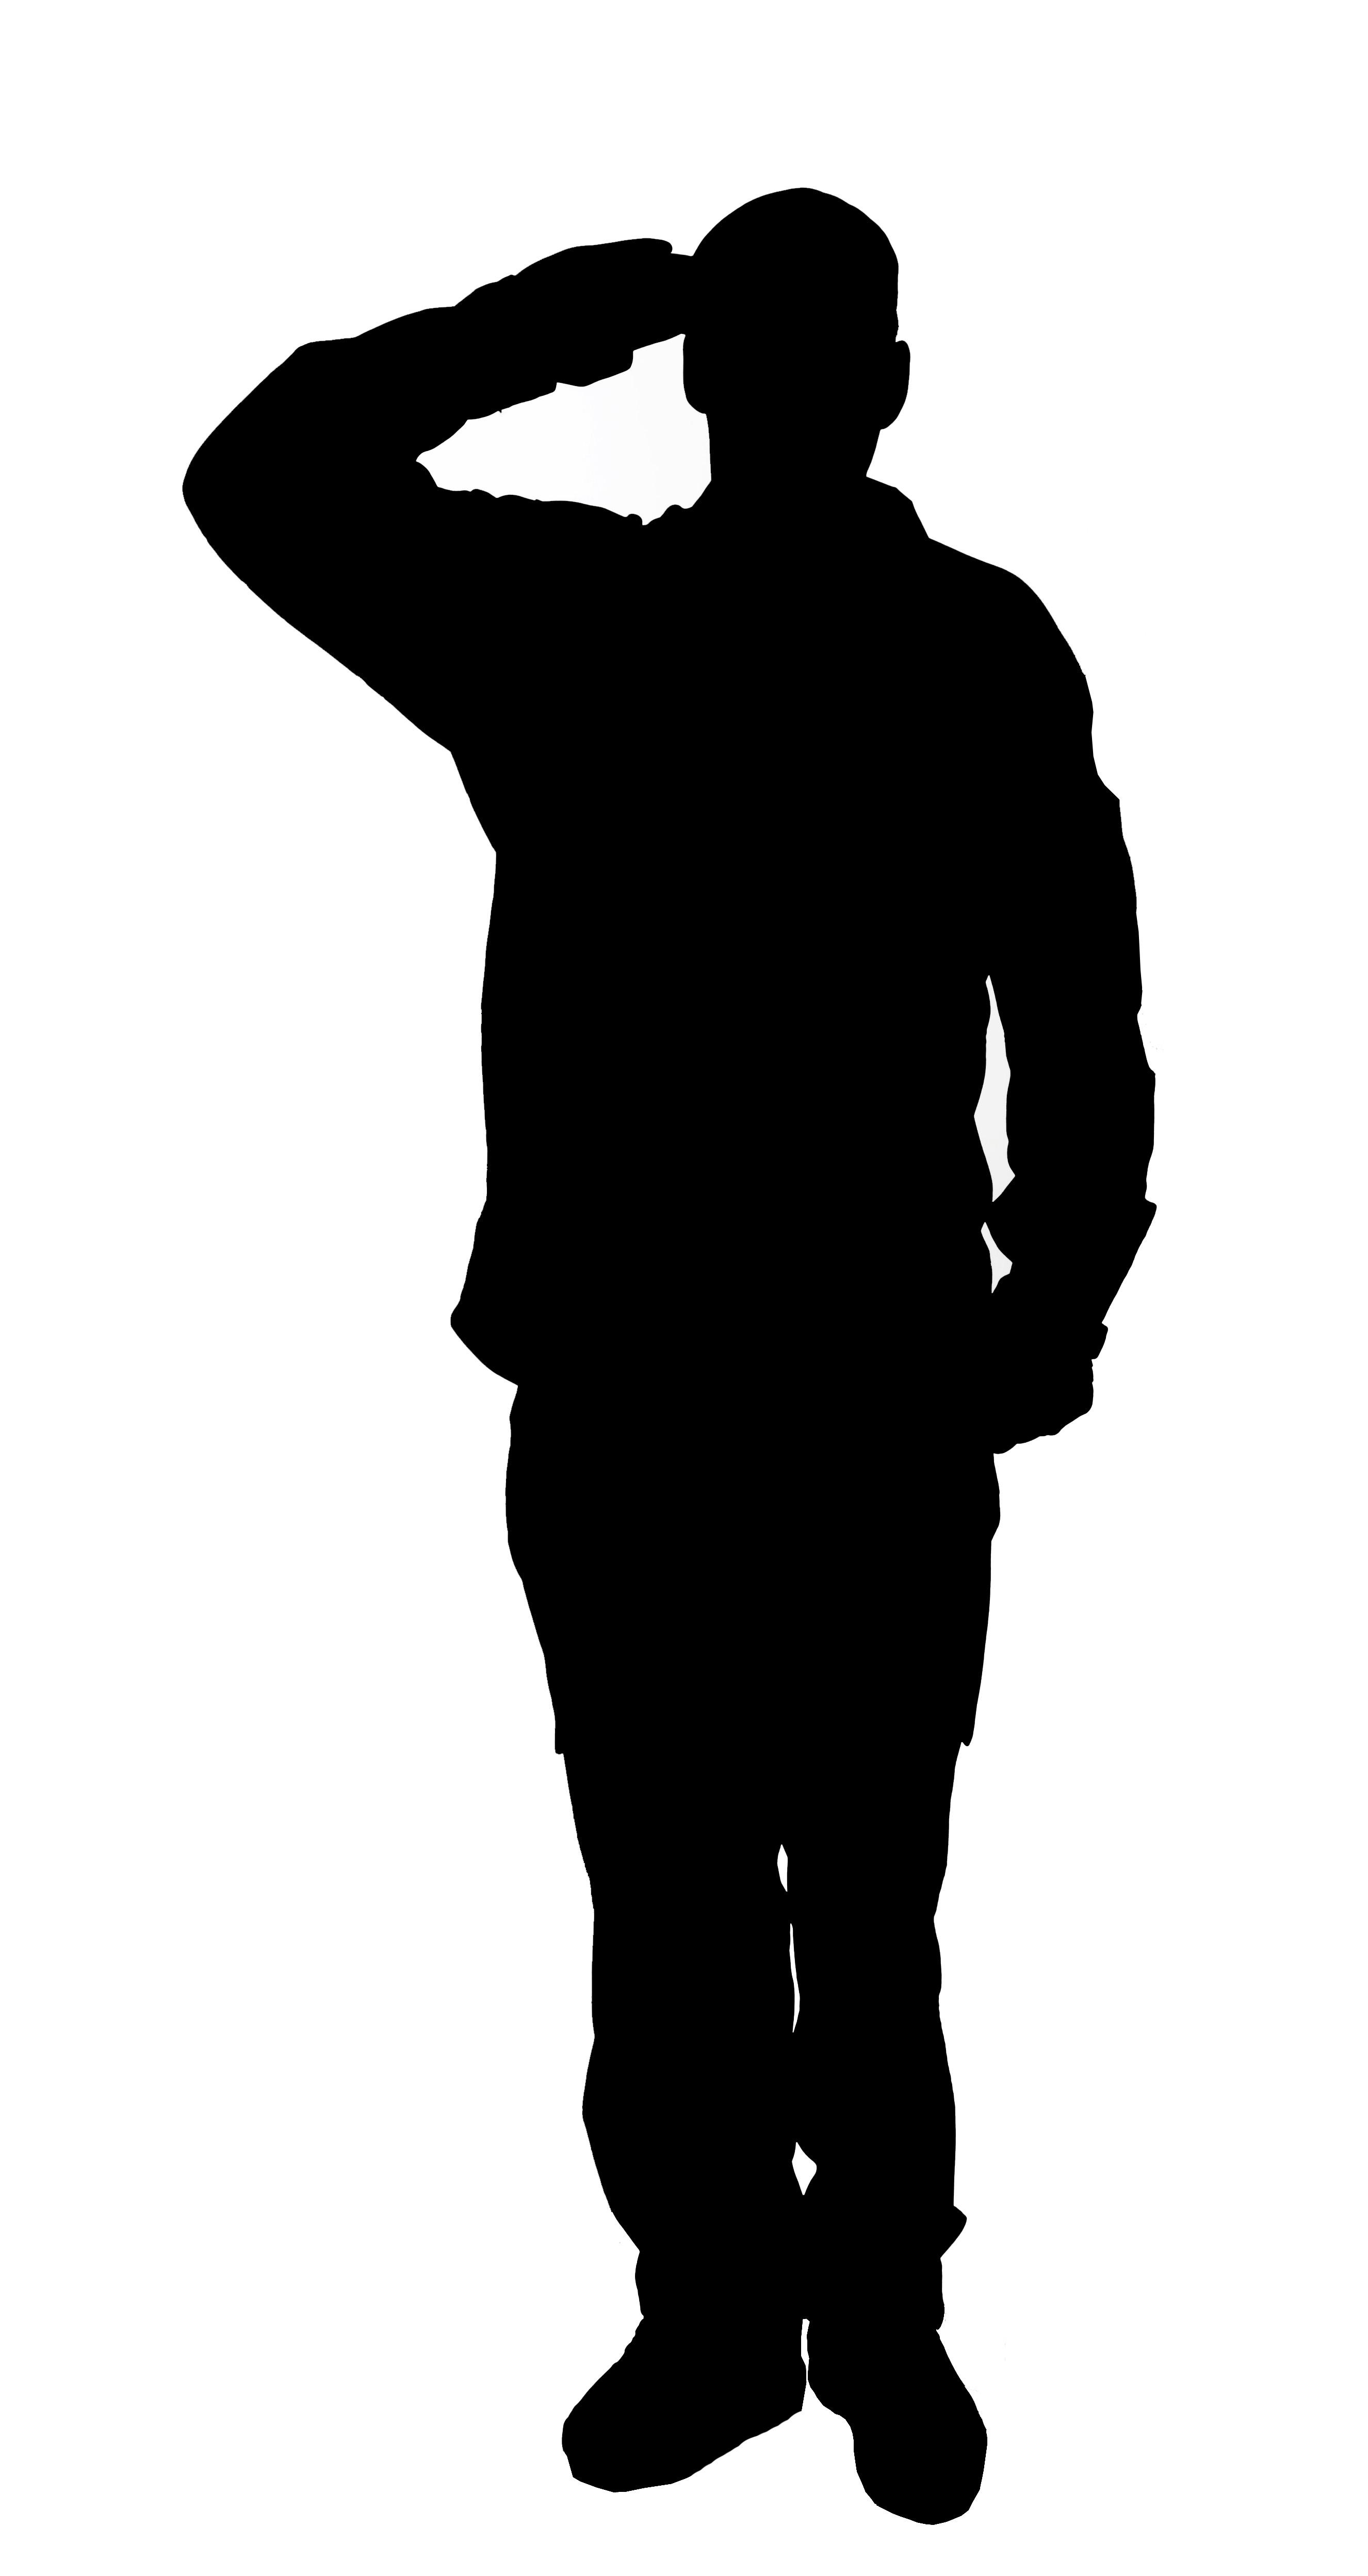 Free Silhouette Soldier, Download Free Clip Art, Free Clip Art